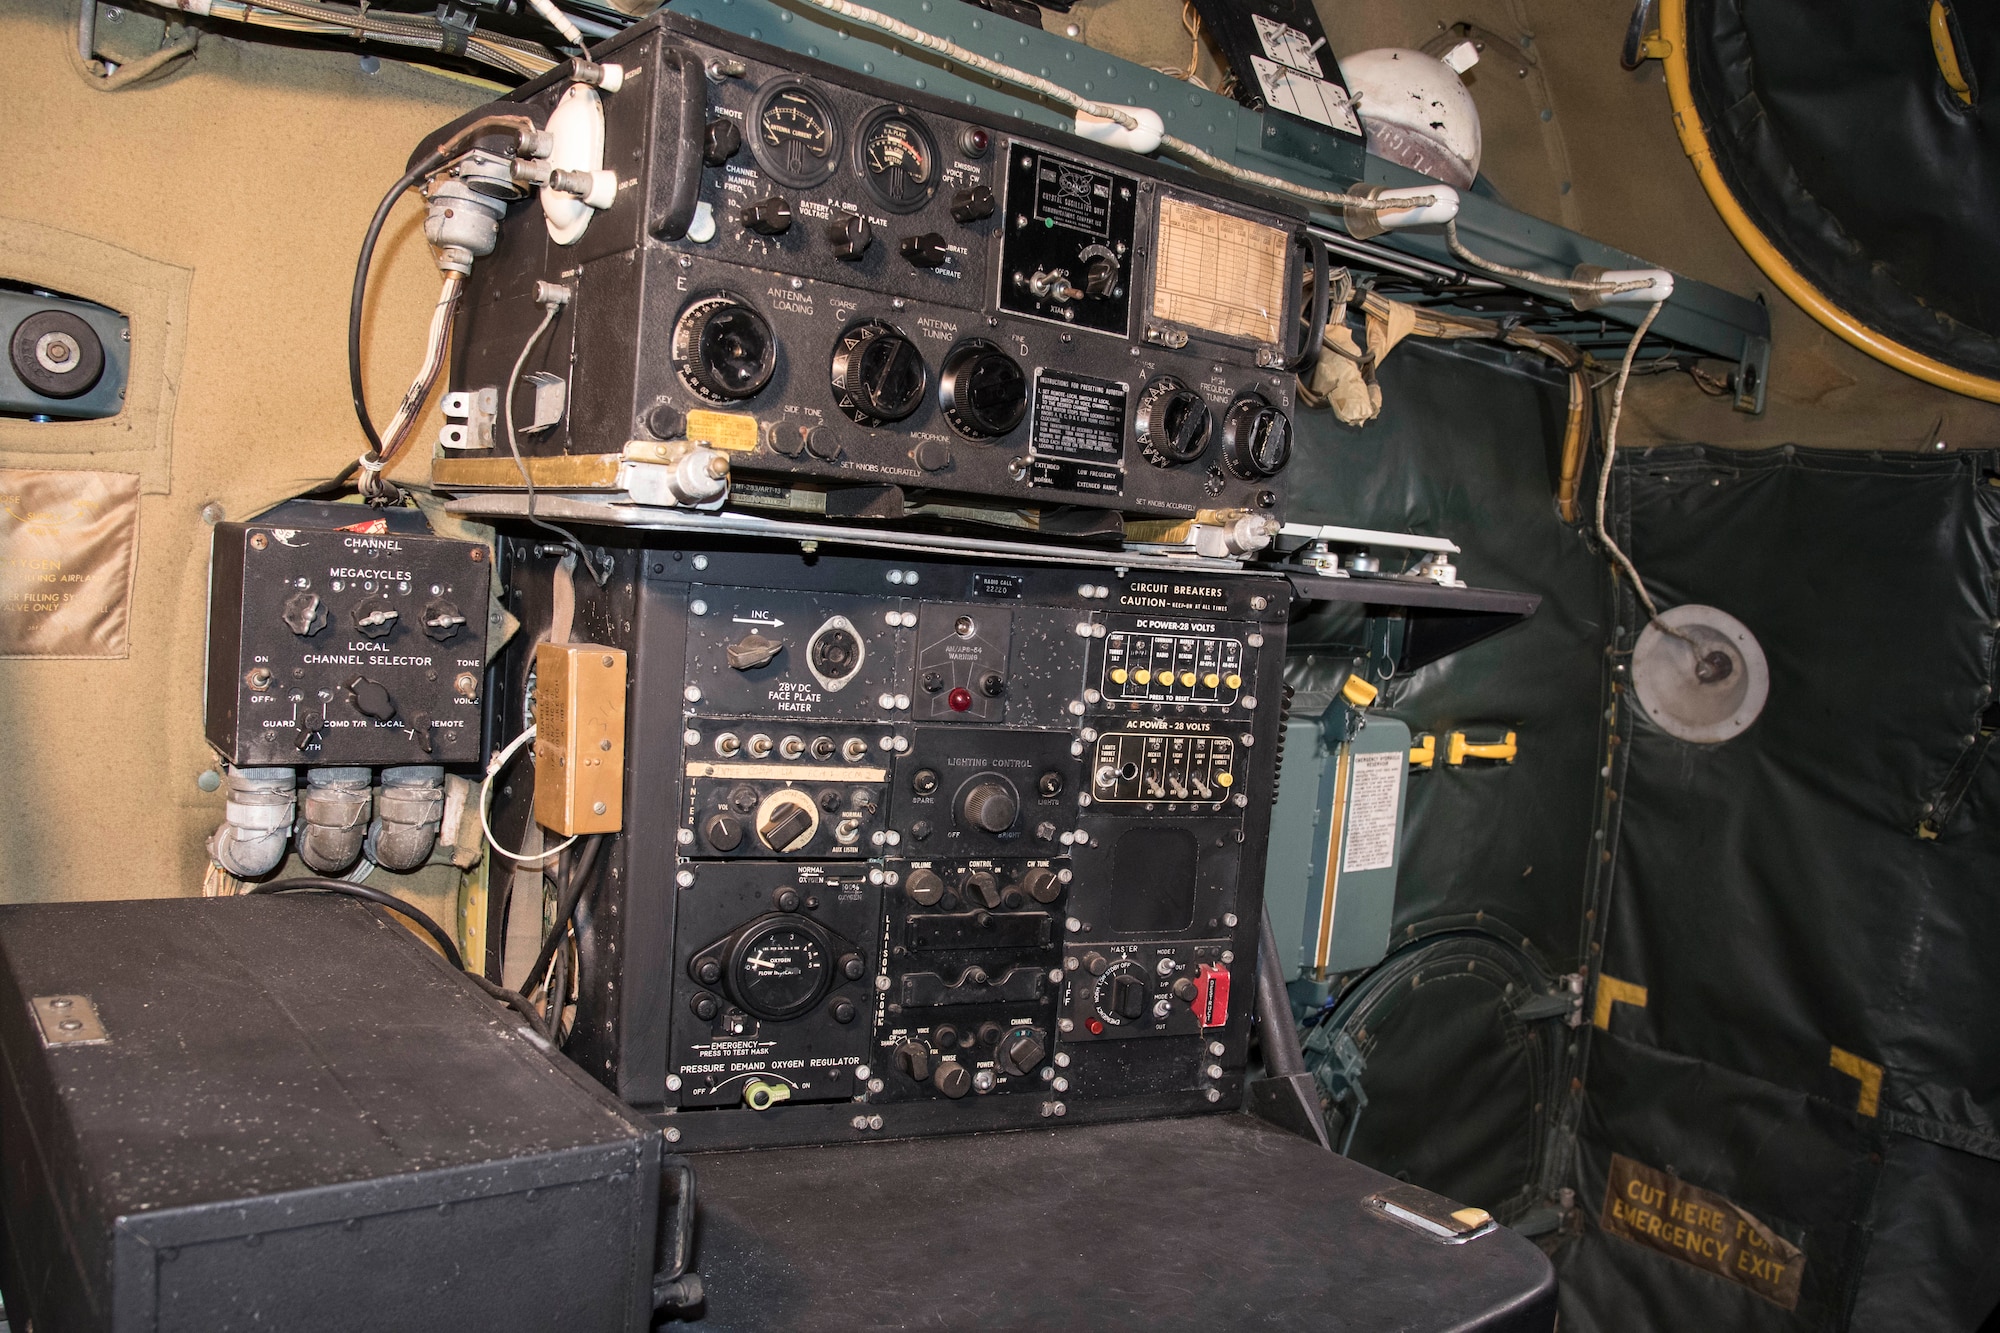 DAYTON, Ohio - Convair B-36J Peacemaker Radio Operator's Station at the National Museum of the U.S. Air Force. (U.S. Air Force photo by Ken LaRock)